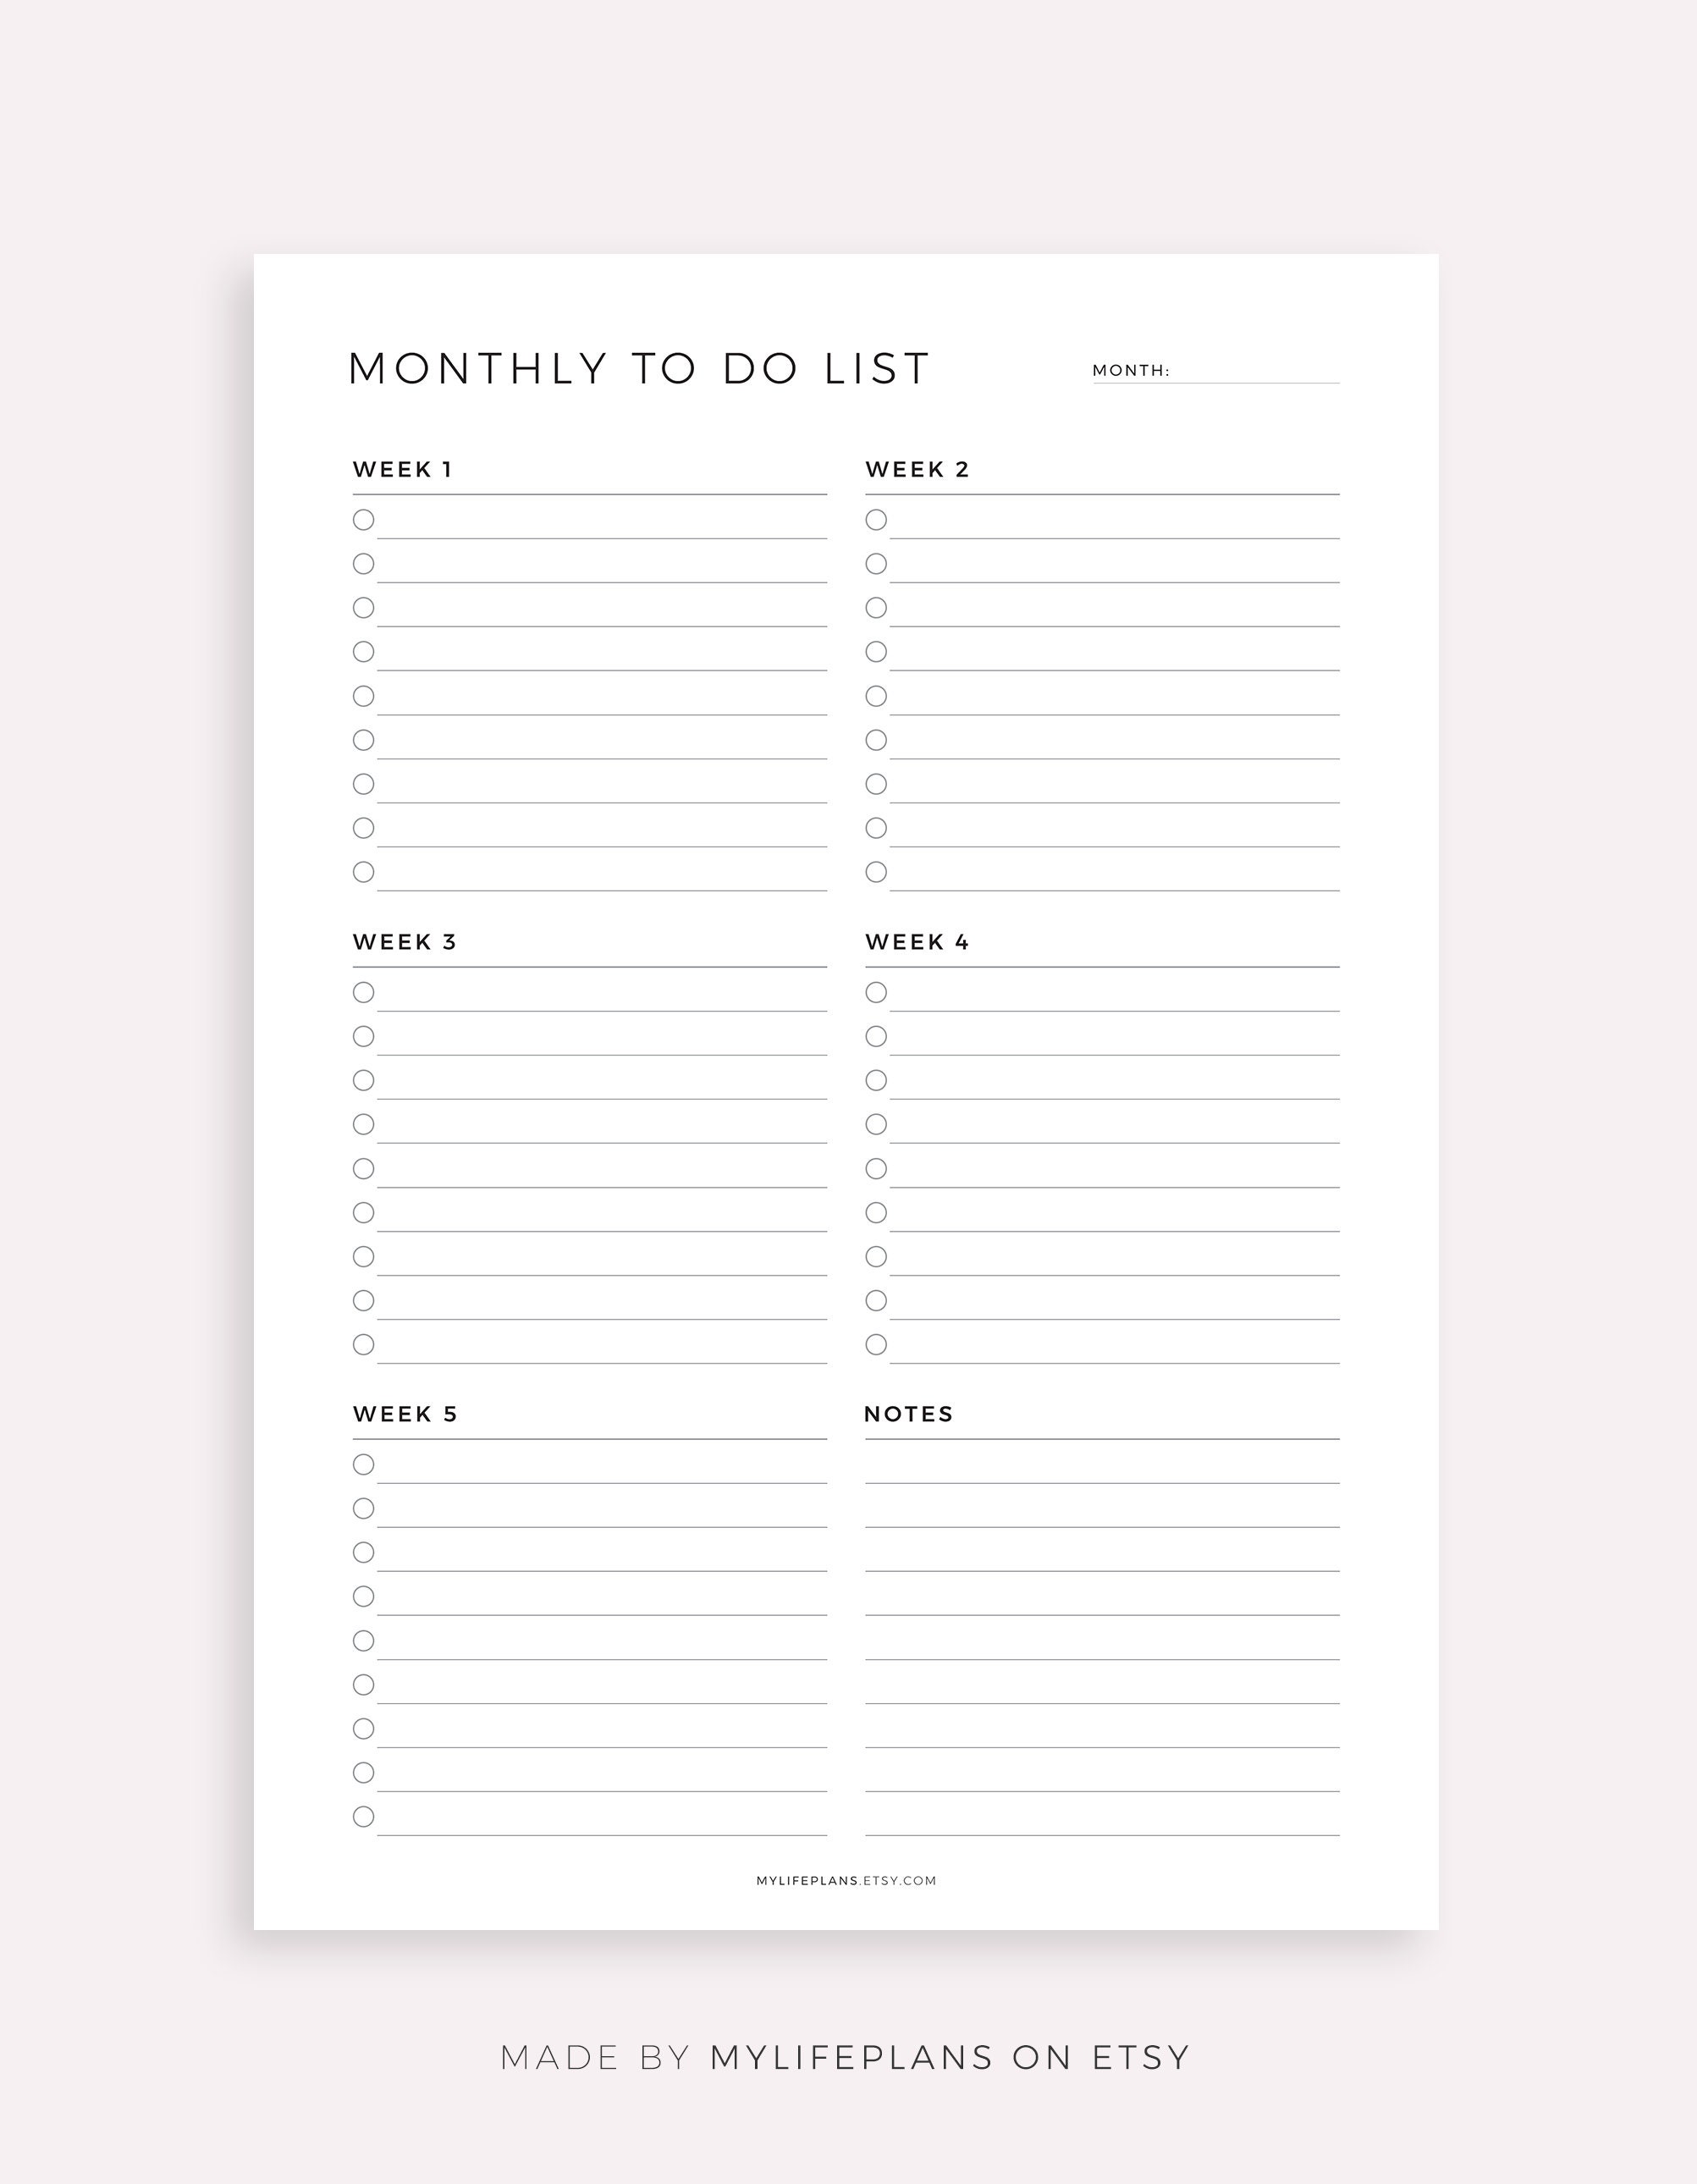 To Do List Templates – Madison's Paper Templates